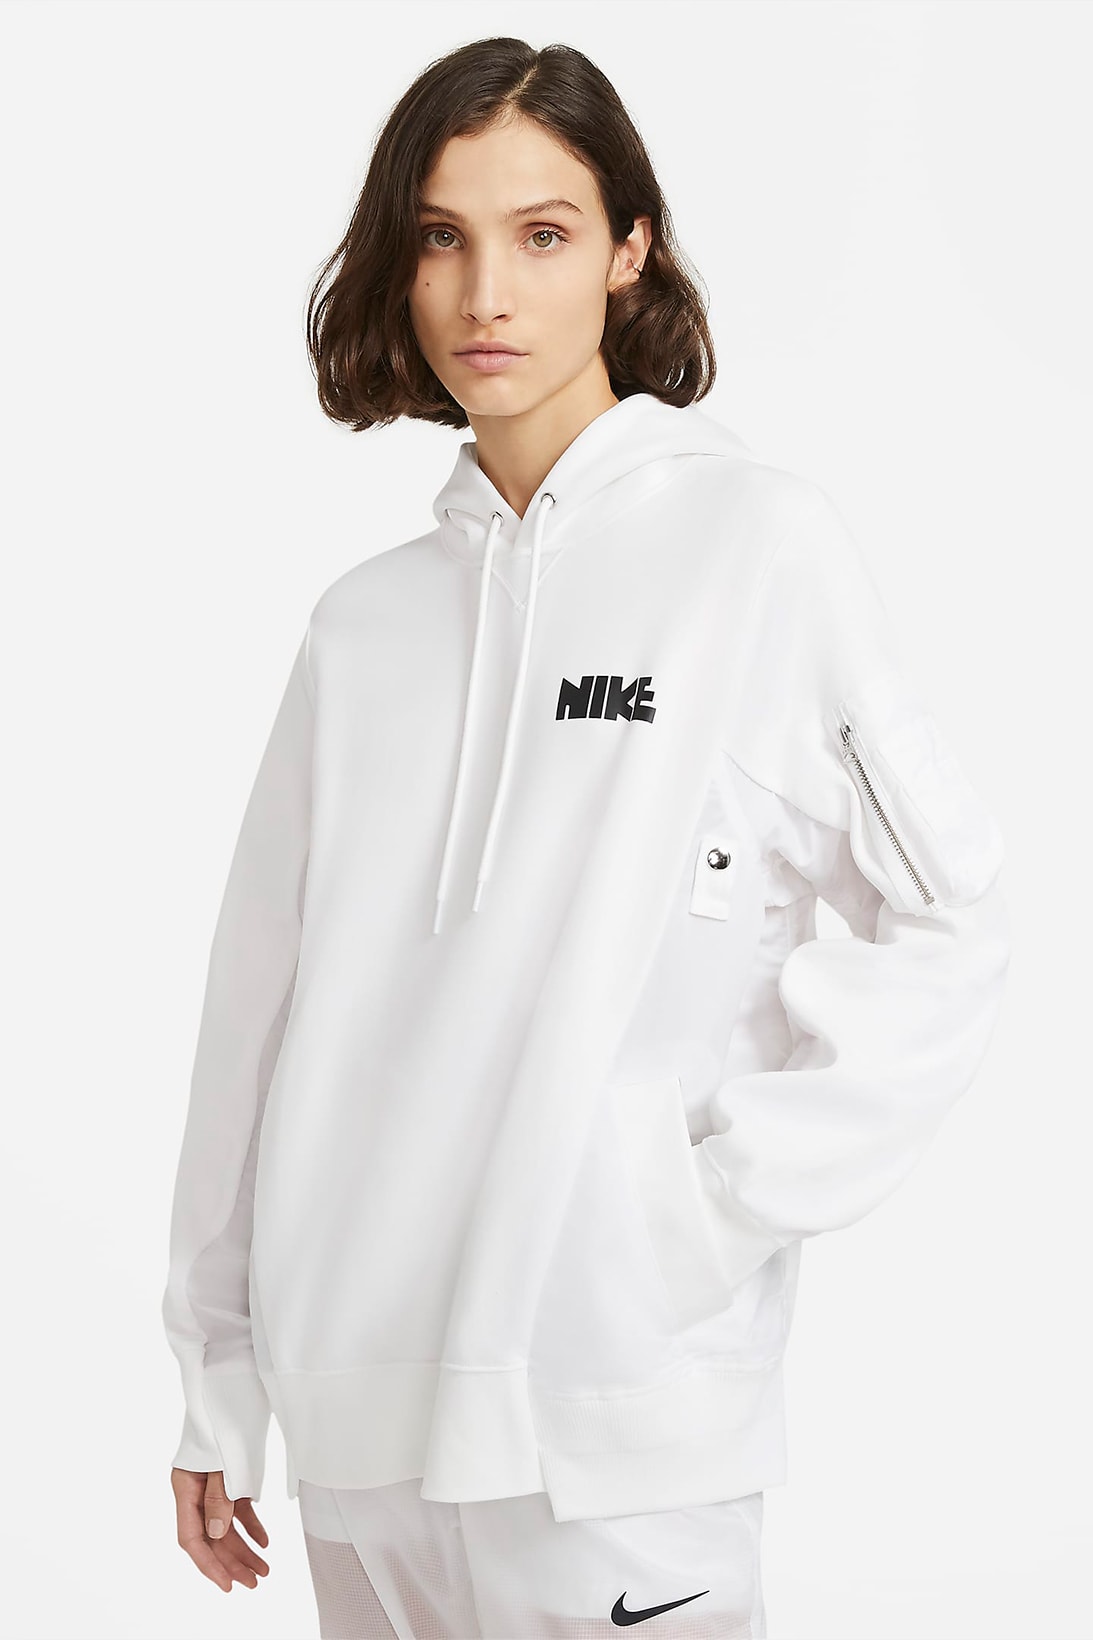 sacai nike collaboration outerwear collection jackets hoodie parka